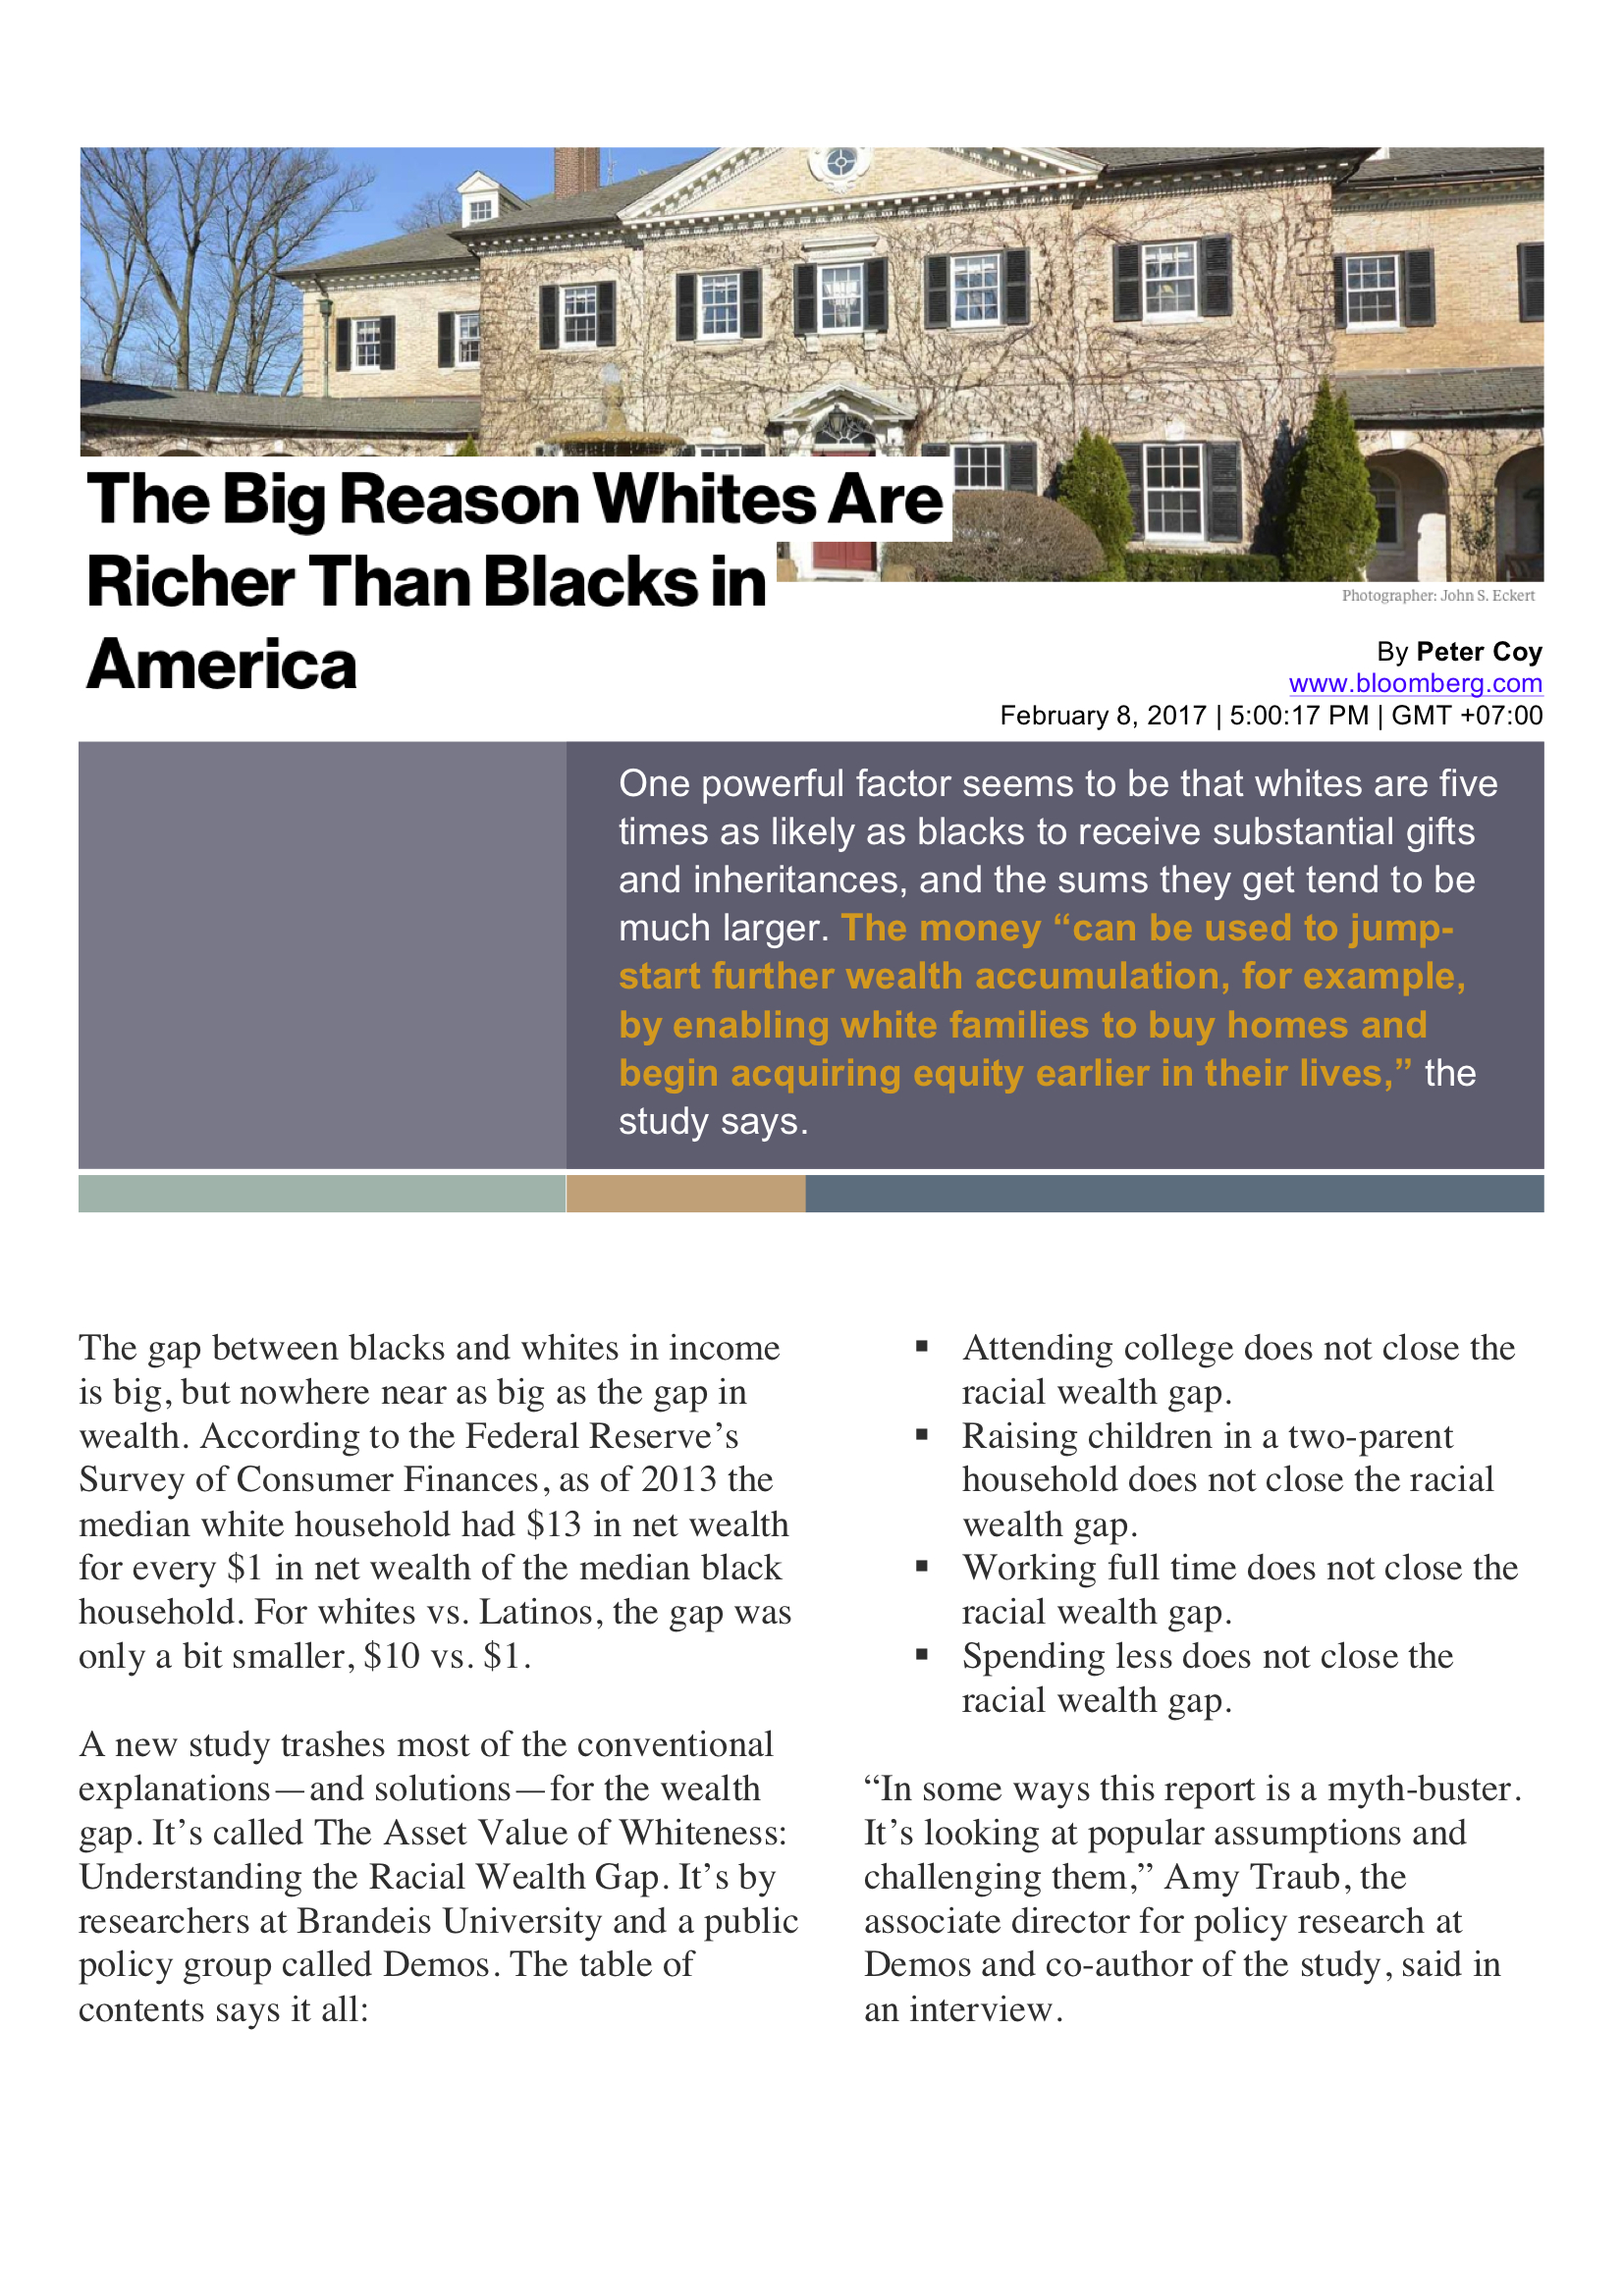 The Big Reason Whites are Richer than Blacks in America [HINT? It relates to substantial gifts and inheritances]